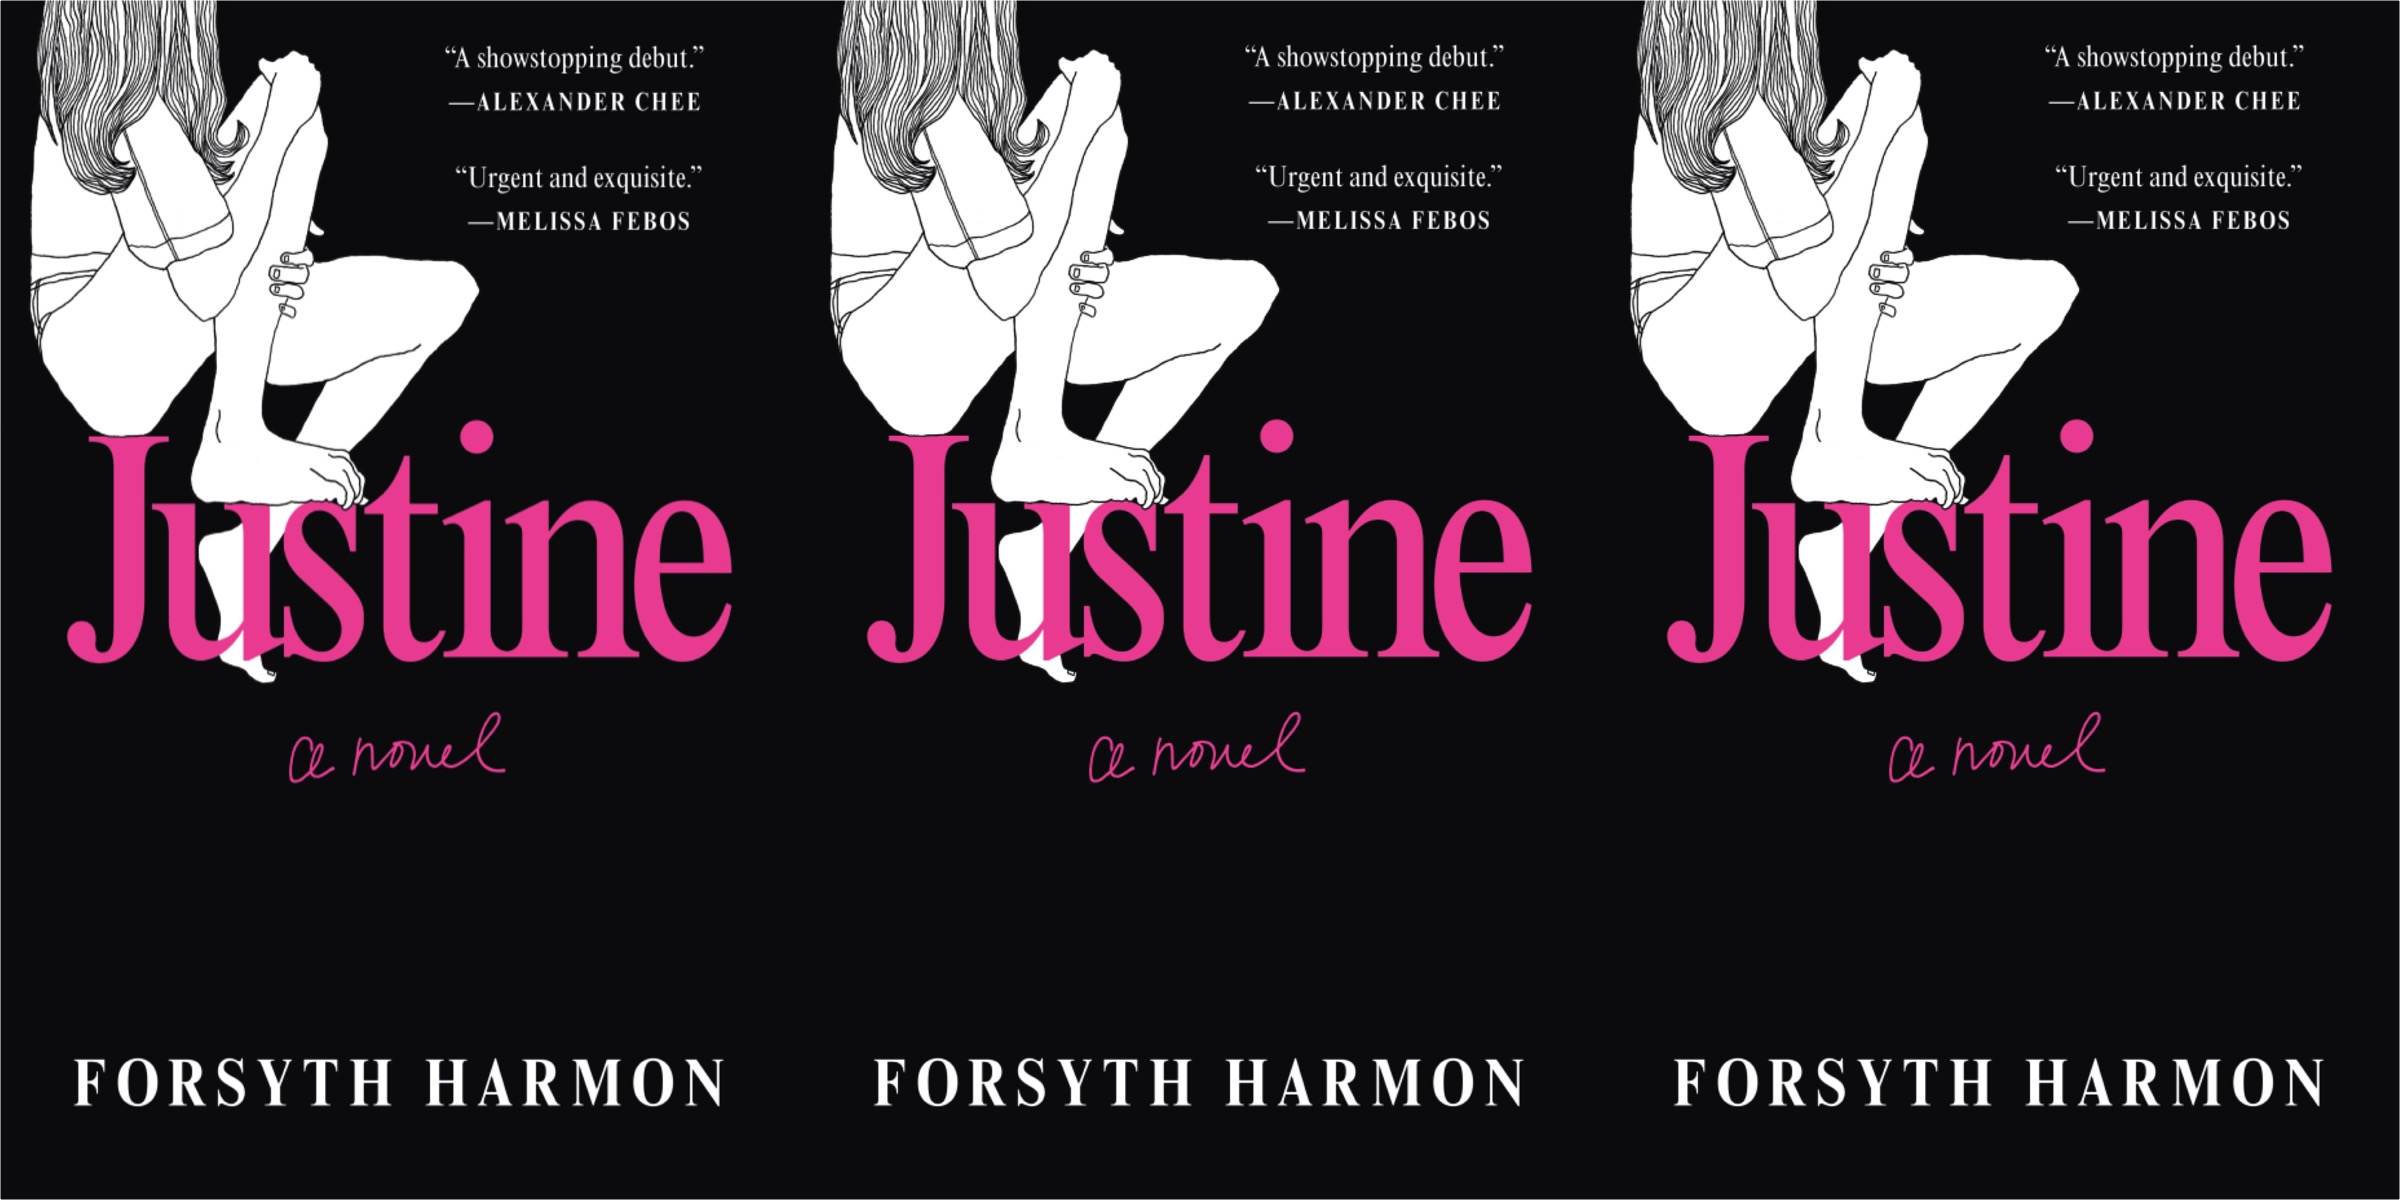 Three repeating images of the cover of Forsythe Harmon's JUSTINE